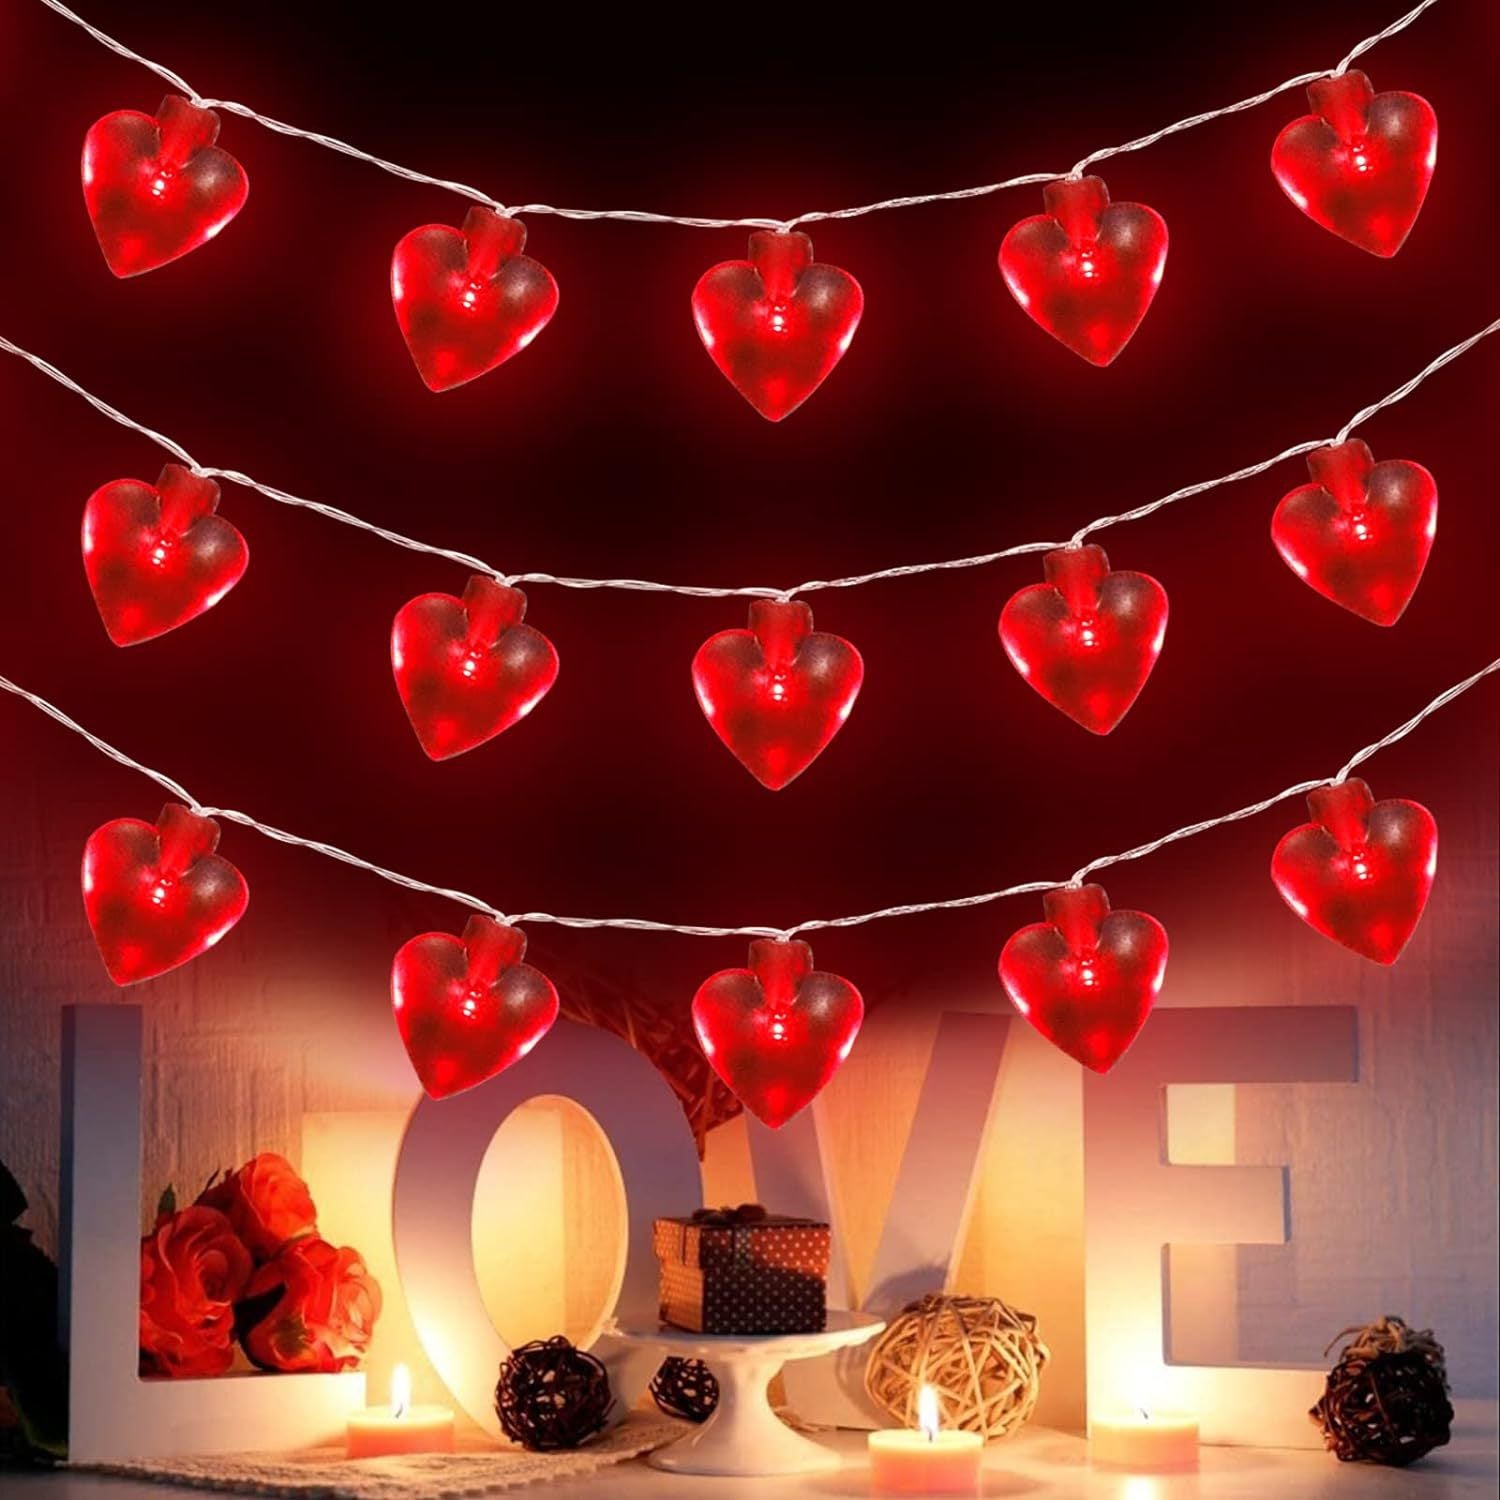 Love Lamp String LED Decorative Lamp Valentine's, Valentine's Day decor, Romantic home accents, Heart-themed decorations, Cupid-inspired ornaments, Love-themed party supplies, Red and pink decor, Valentine's Day table settings, Romantic ambiance accessories, Heart-shaped embellishments, Valentine's Day home embellishments